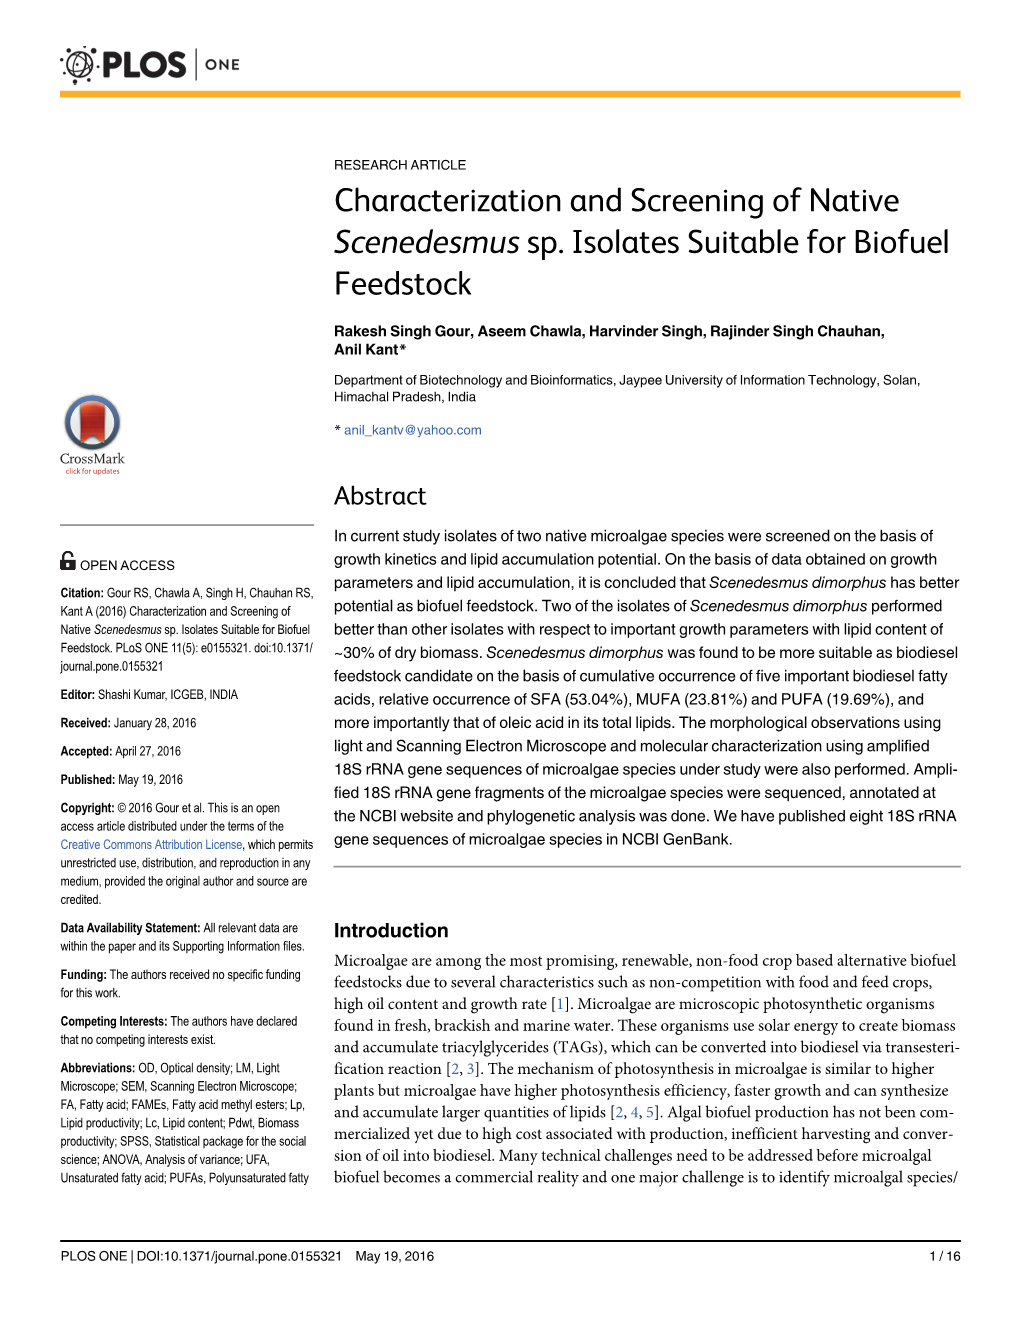 Characterization and Screening of Native Scenedesmus Sp. Isolates Suitable for Biofuel Feedstock